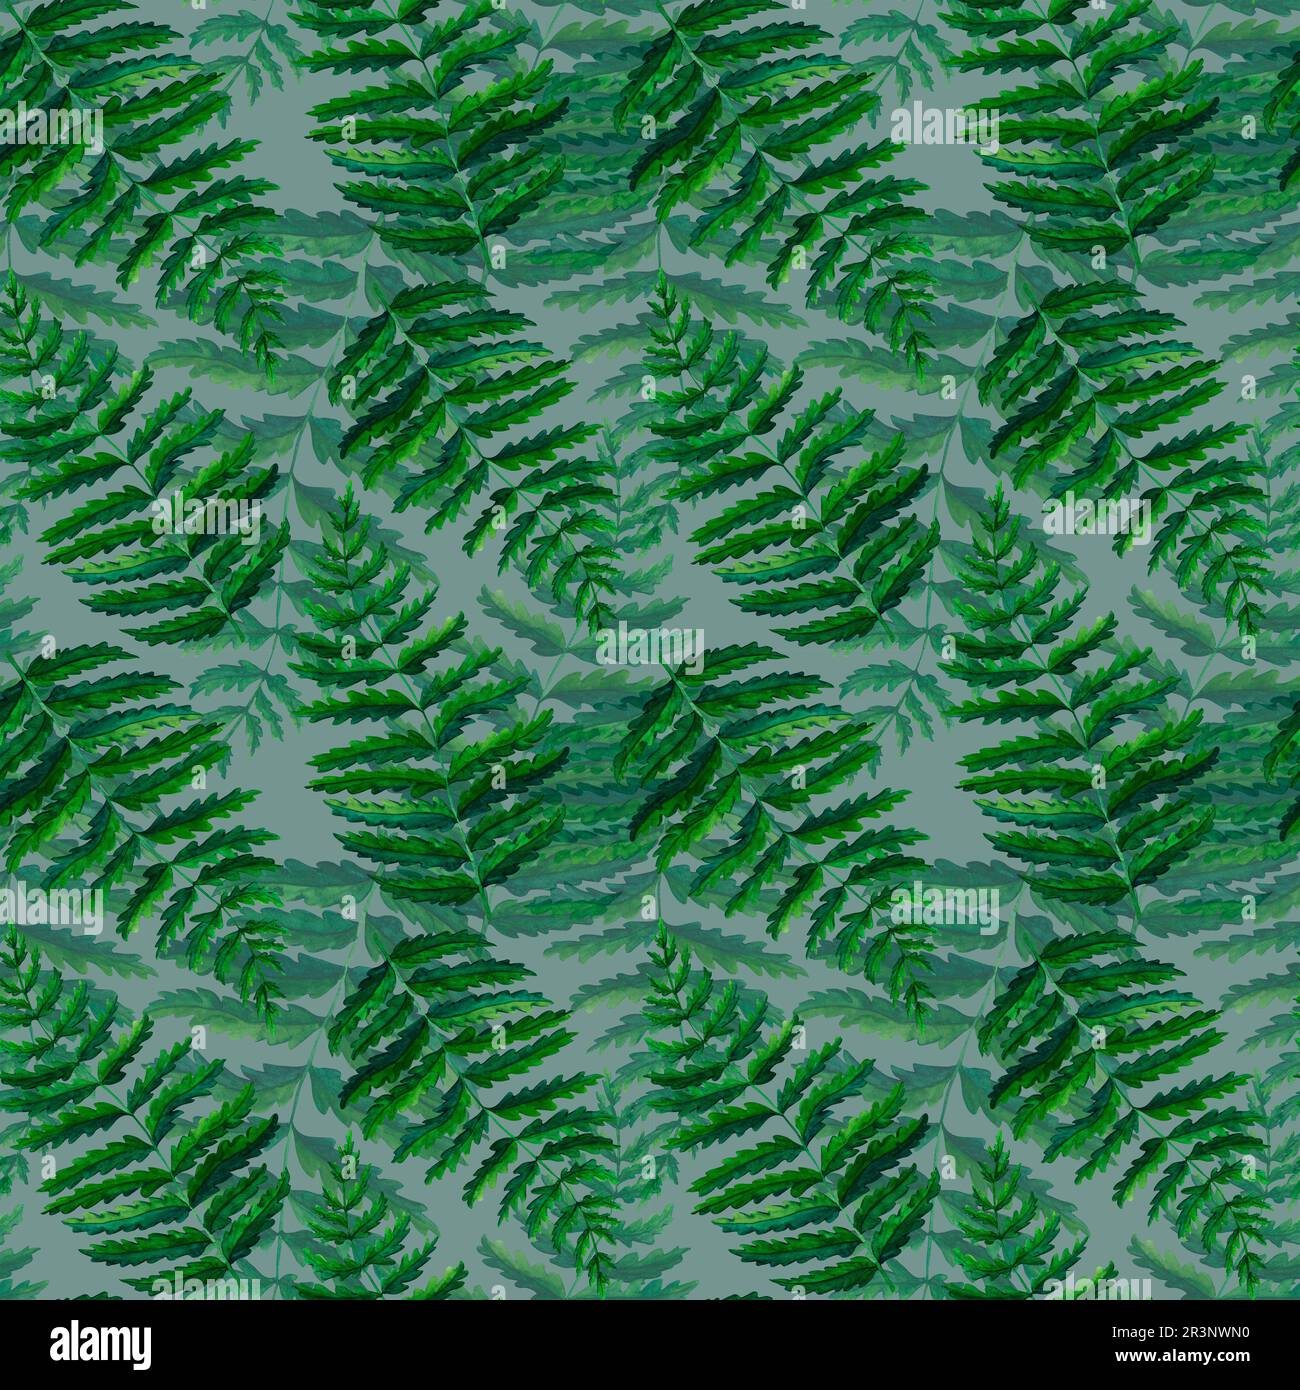 Seamless pattern fern watercolor hand painted illustration in green colors, greenery branch, twig, stem, forest plant isolated on grey background for Stock Photo